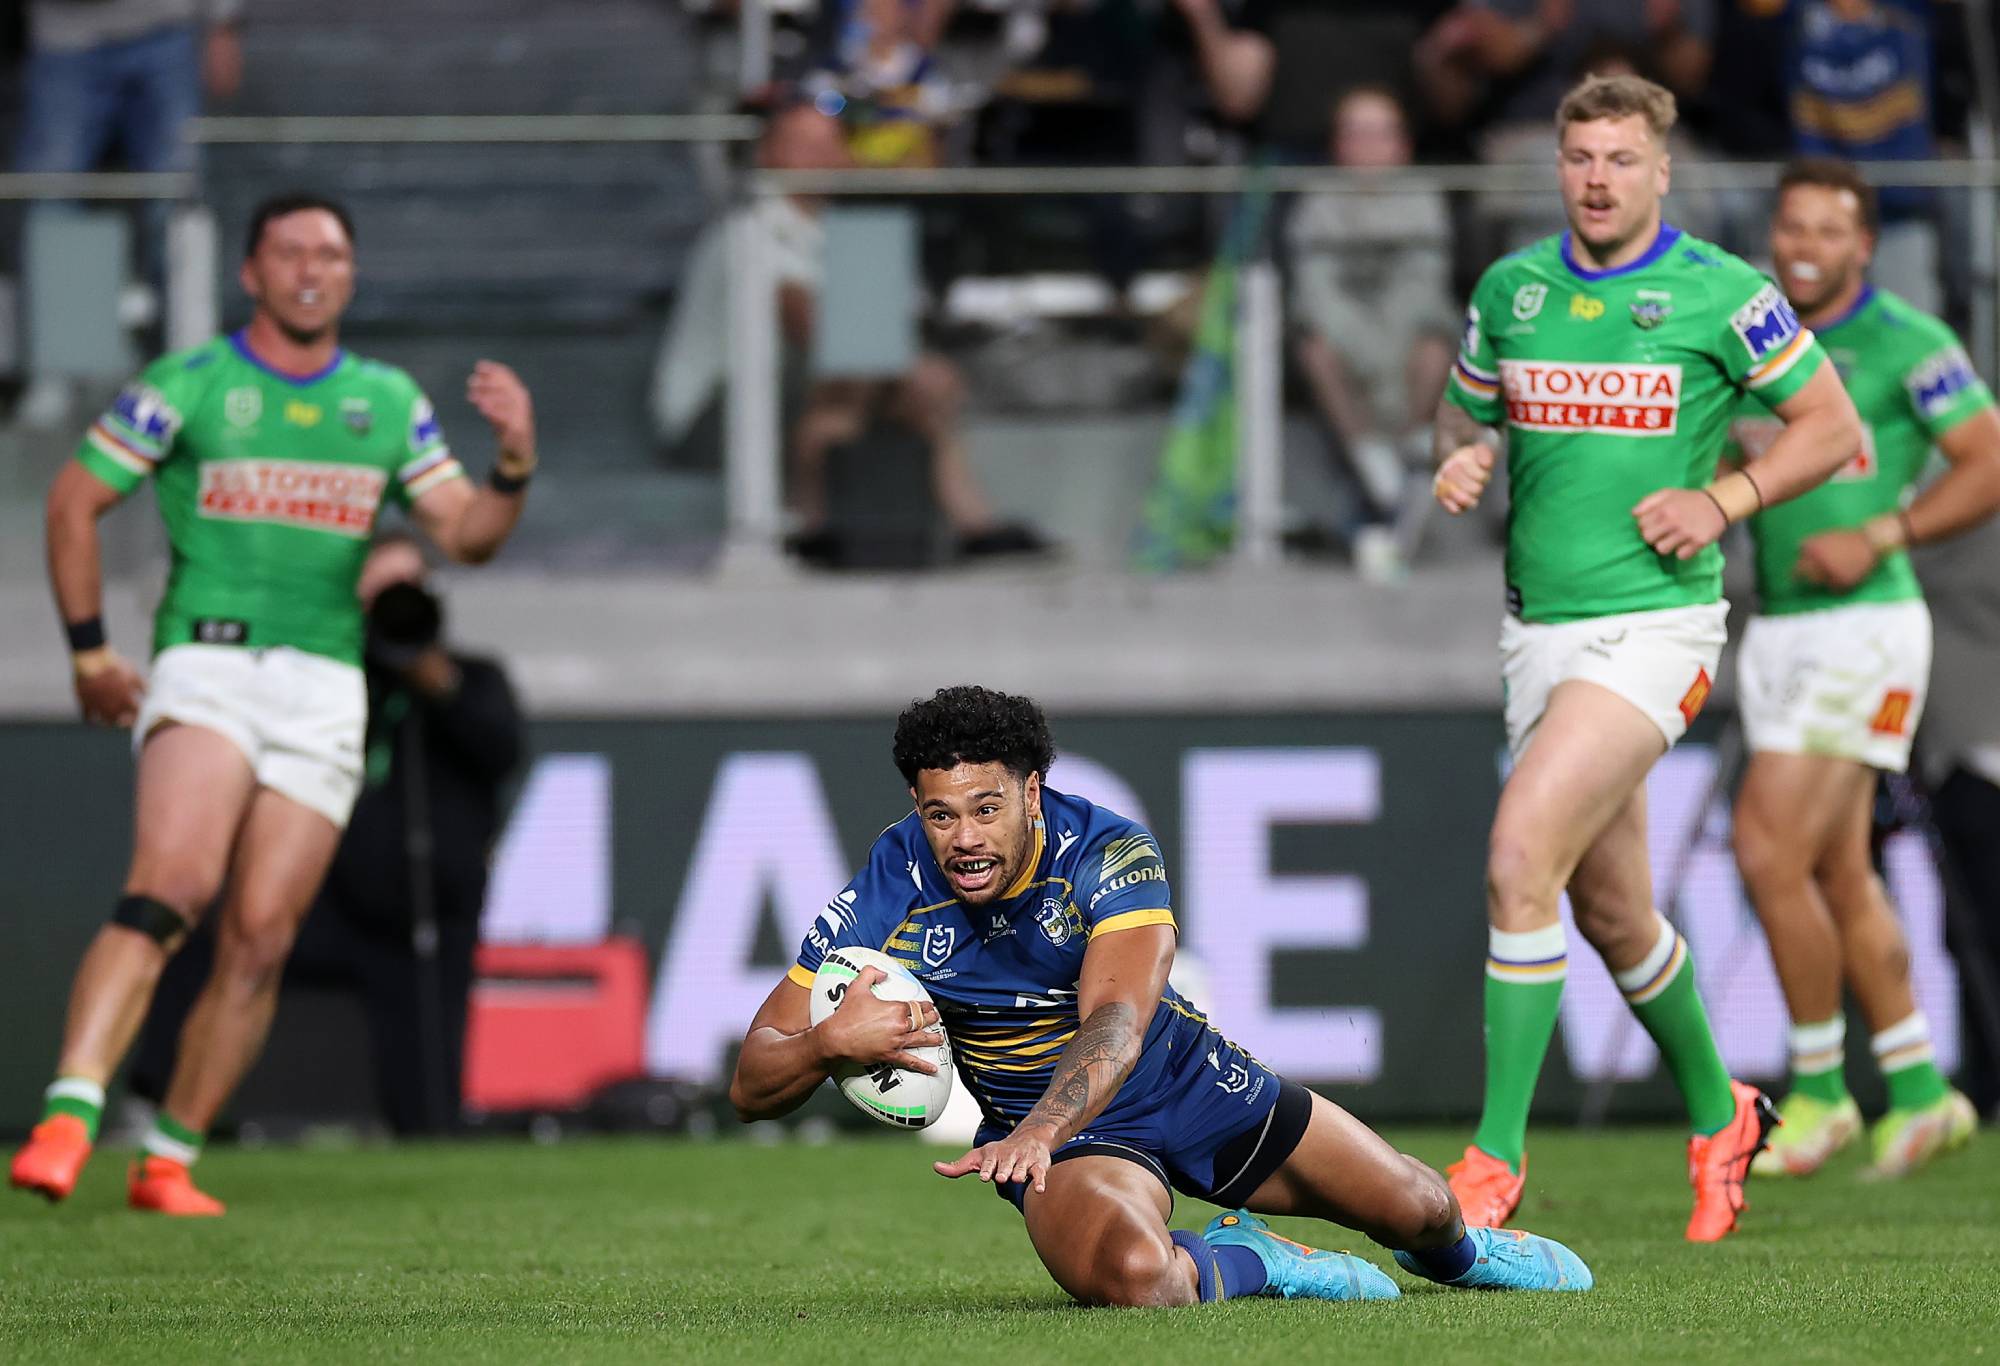 SYDNEY, AUSTRALIA - SEPTEMBER 16: Waqa Blake of the Eels scores a try during the NRL Semi Final match between the Parramatta Eels and the Canberra Raiders at CommBank Stadium on September 16, 2022 in Sydney, Australia. (Photo by Cameron Spencer/Getty Images)